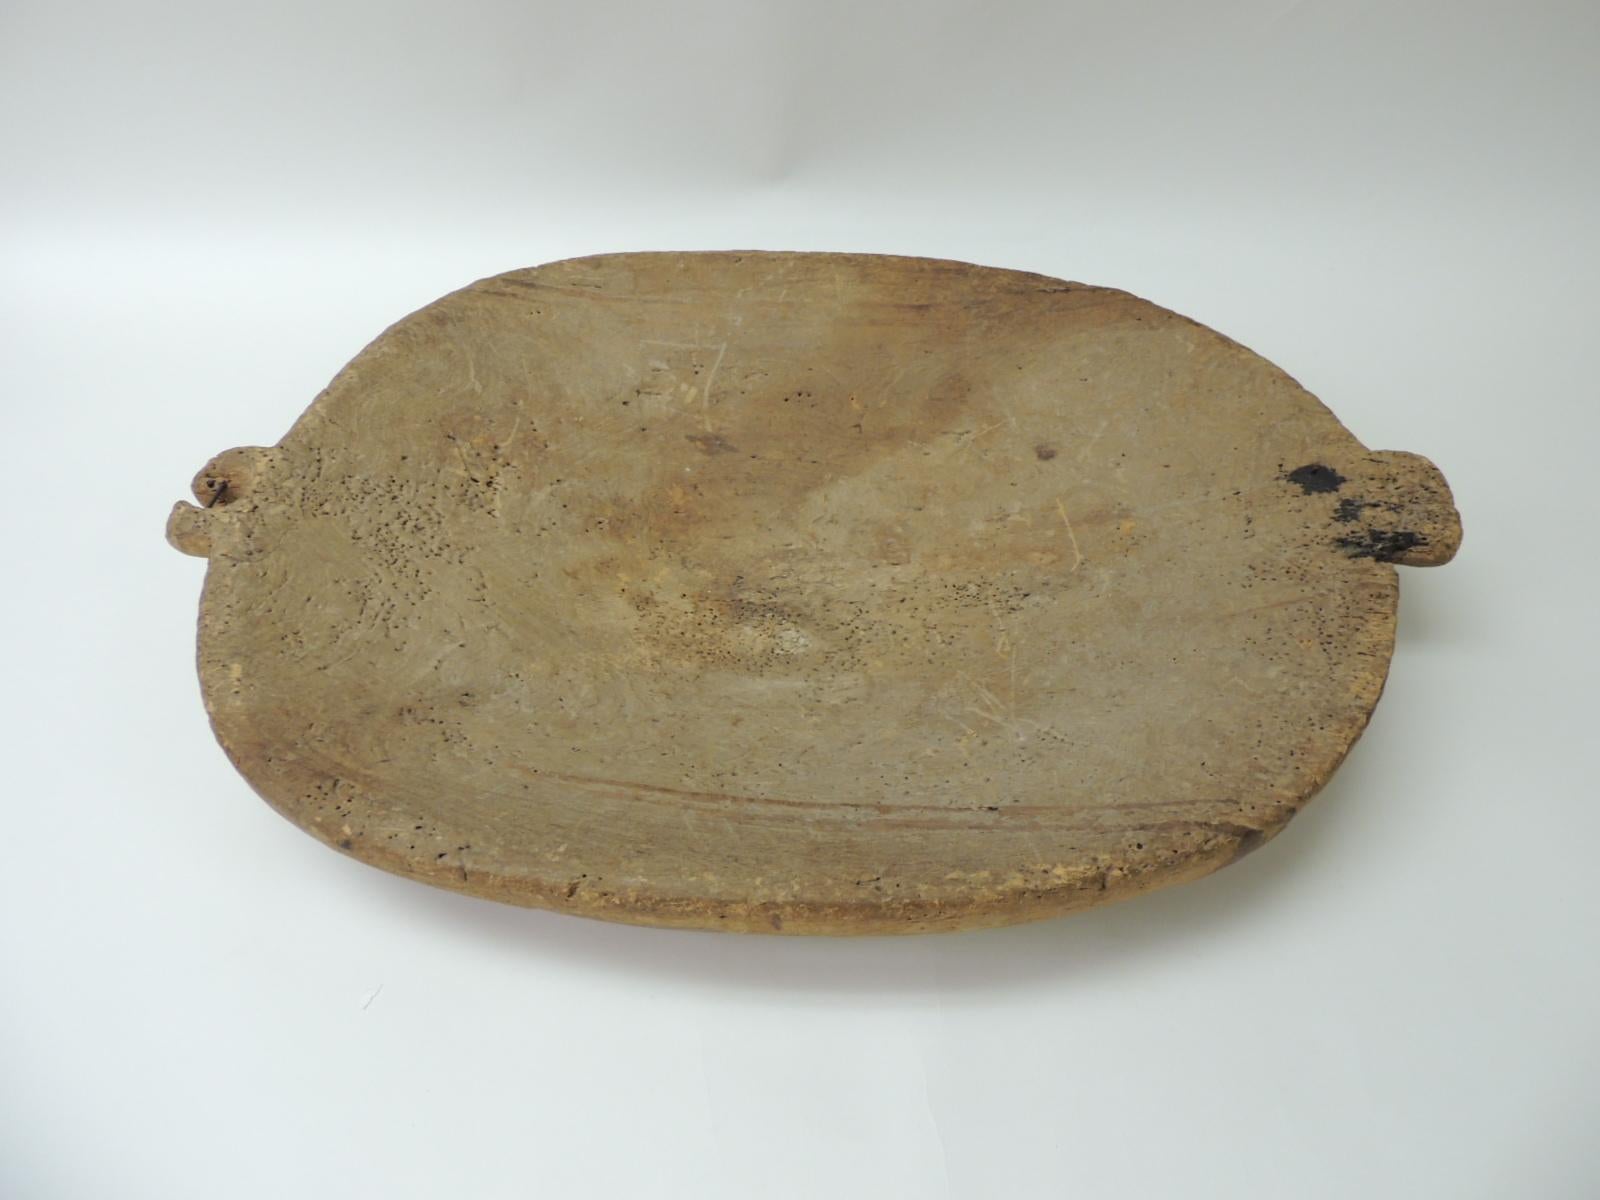 Large scale rustic hand-carved solid maple wood serving bowl. 
Natural rustic primitive decorative or serving bowl.
Canada
1880s.
Size: 16 x 22 x 5 H.